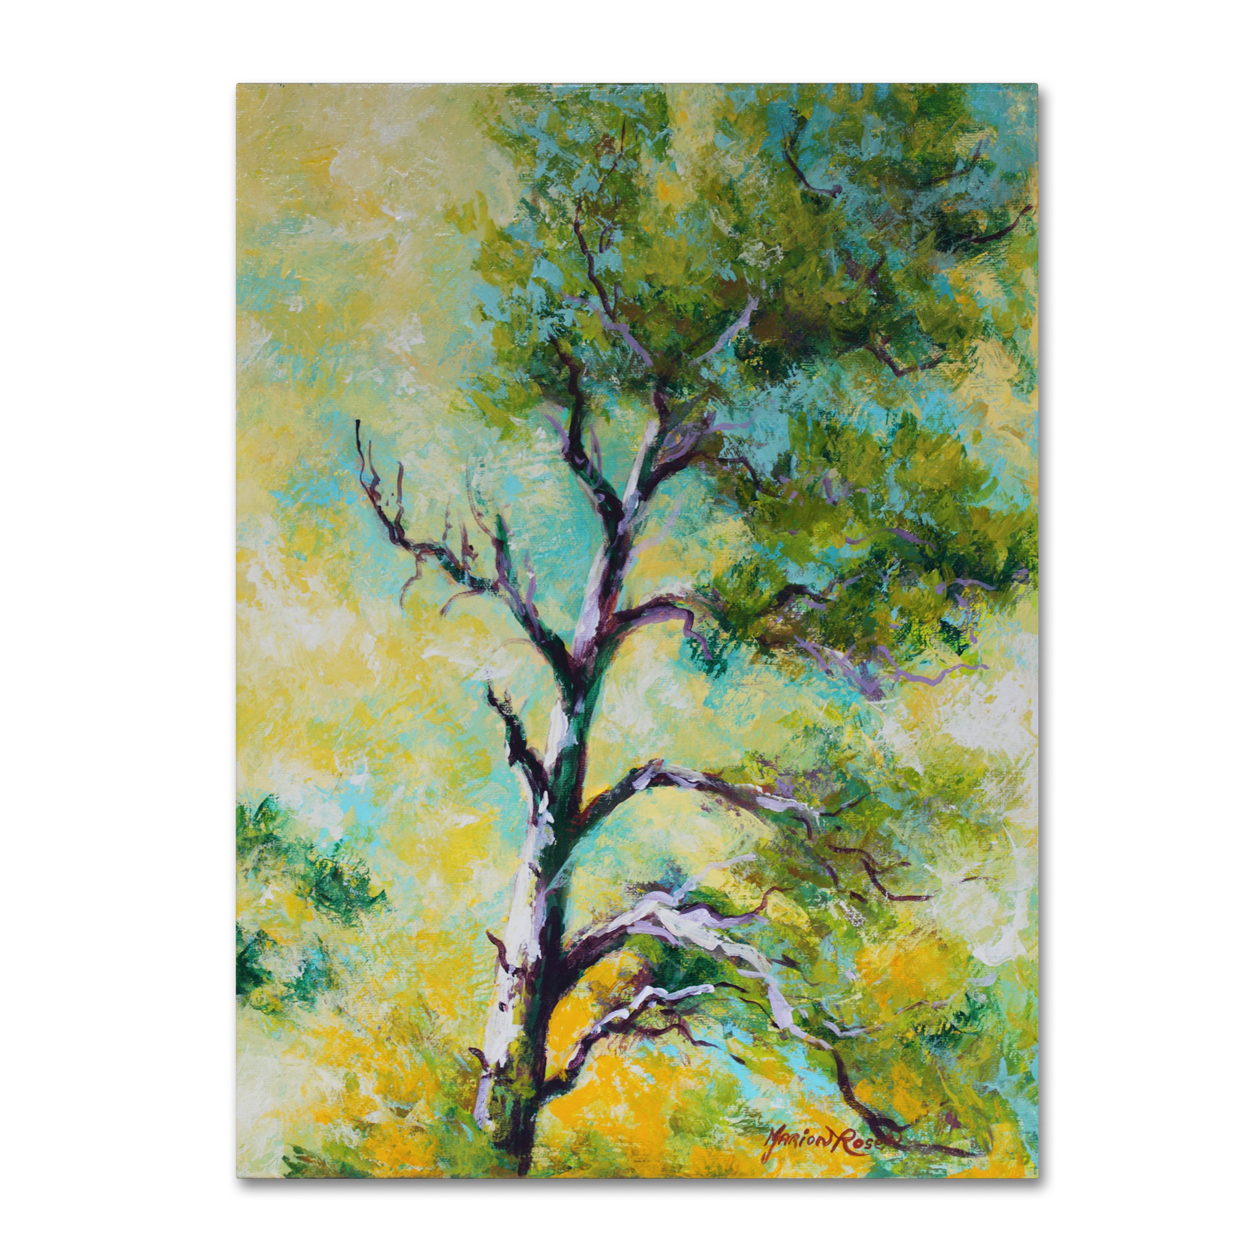 Marion Rose 'Pine Abstract' Ready To Hang Canvas Art 35 X 47 Inches Made In USA